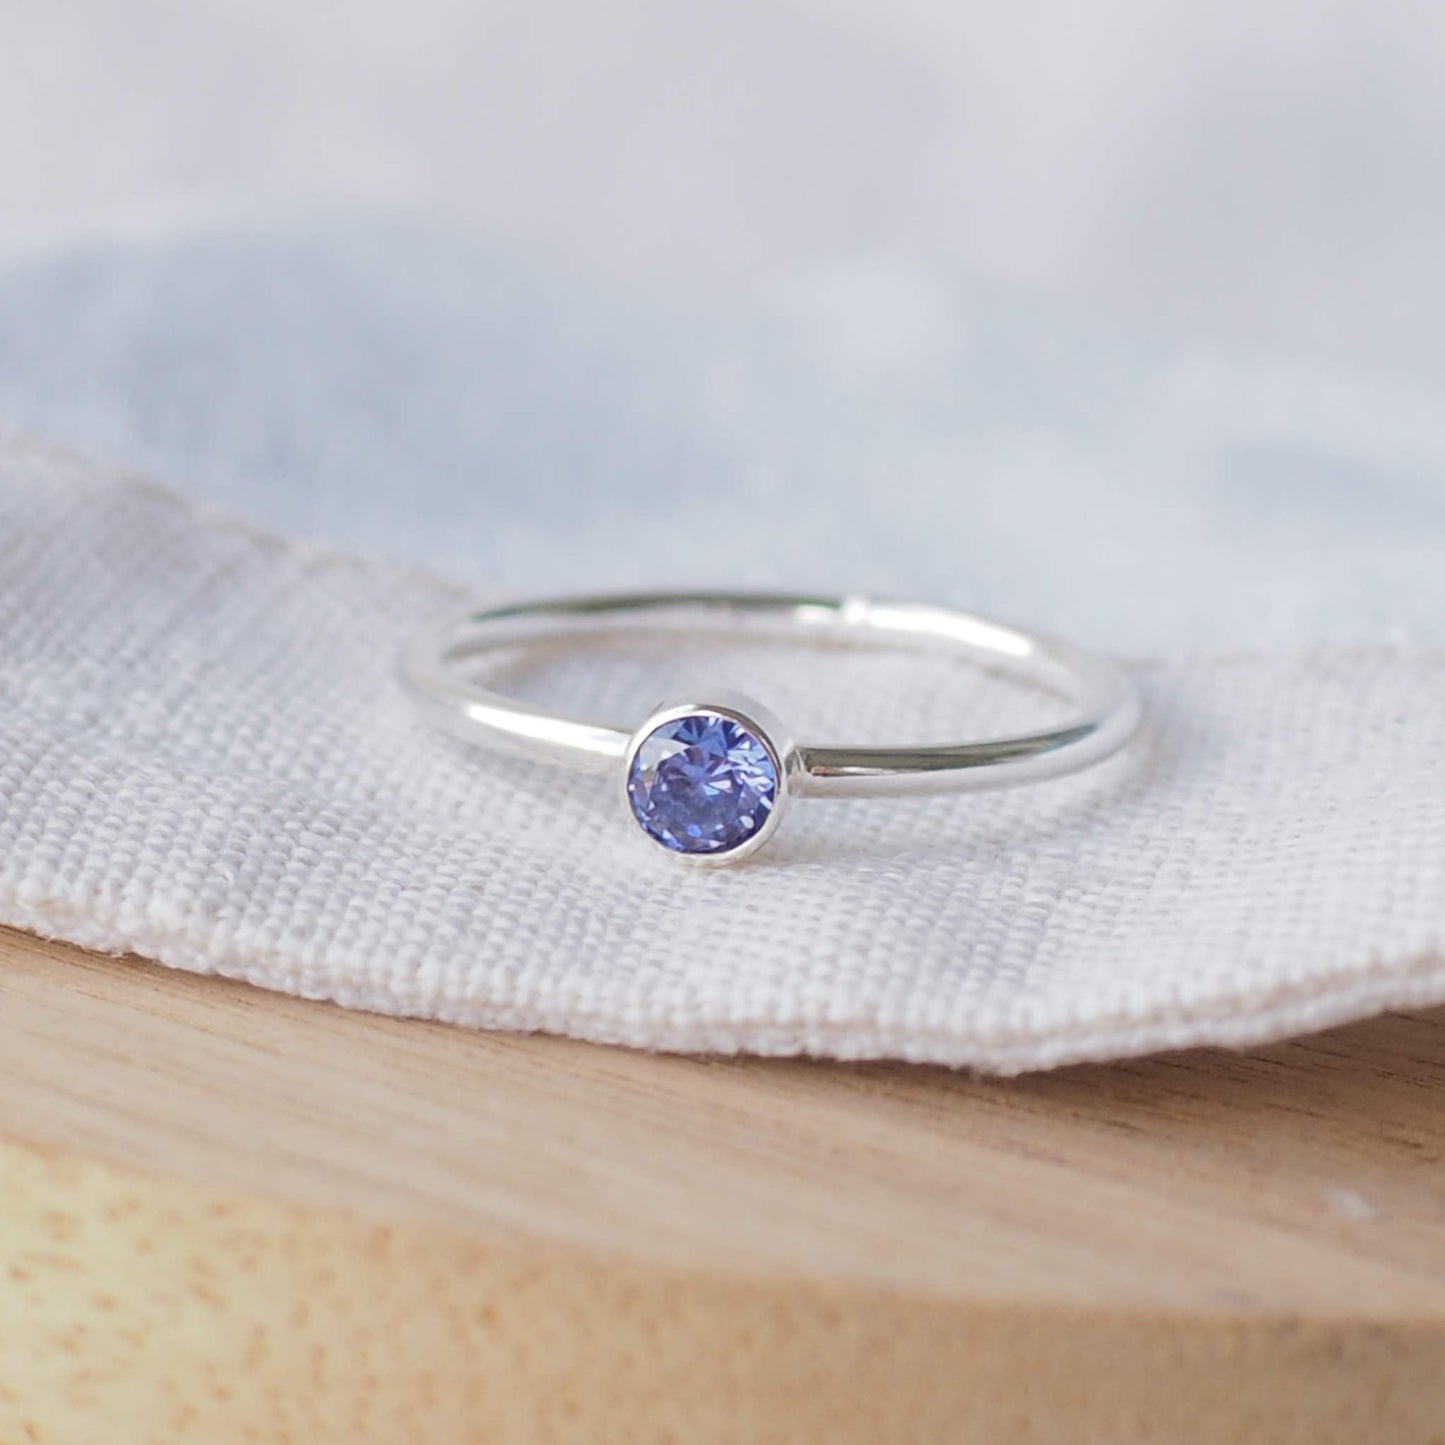 Tanzanite December Birthstone ring made from a Violet Cubic zirconia stone and Sterling Silver. A vibrant round 4mm gemstone set in a minimalist style onto a band of Sterling Silver, and made to order to your ring size. Handmade in Scotland by maram jewellery